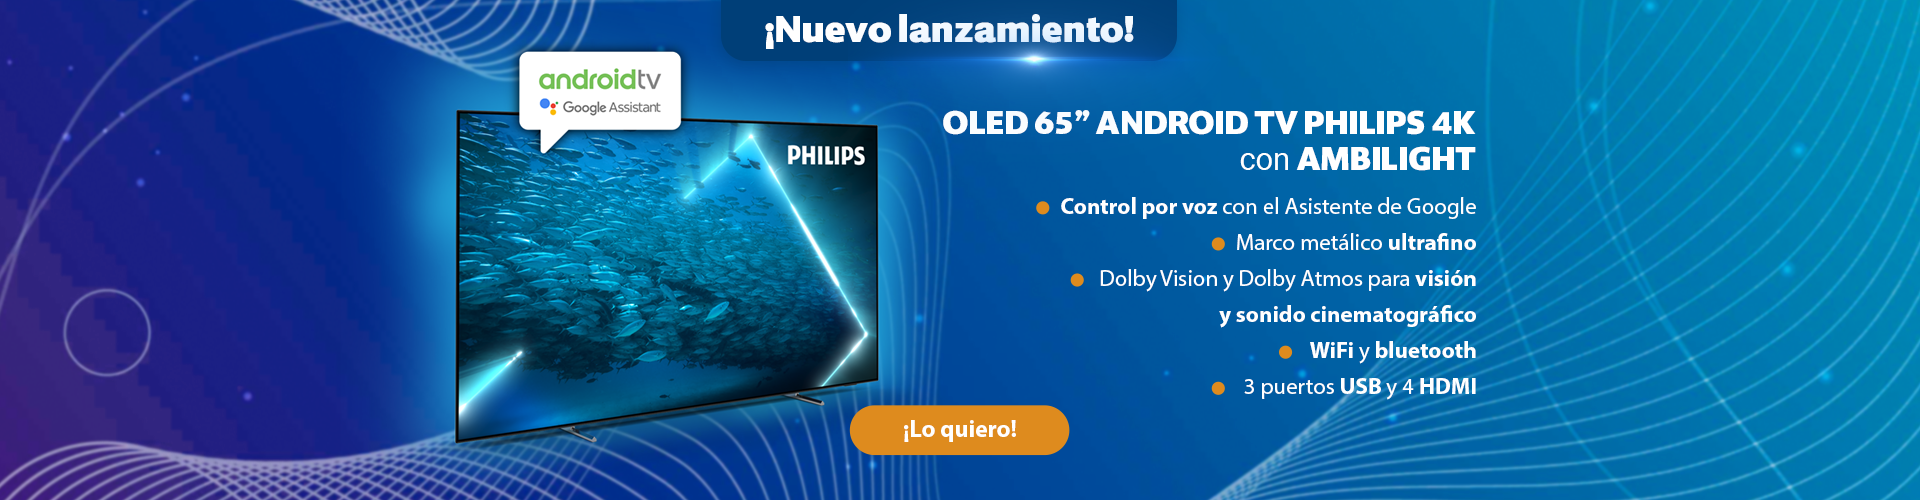 Oled 65" Android Tv Philips